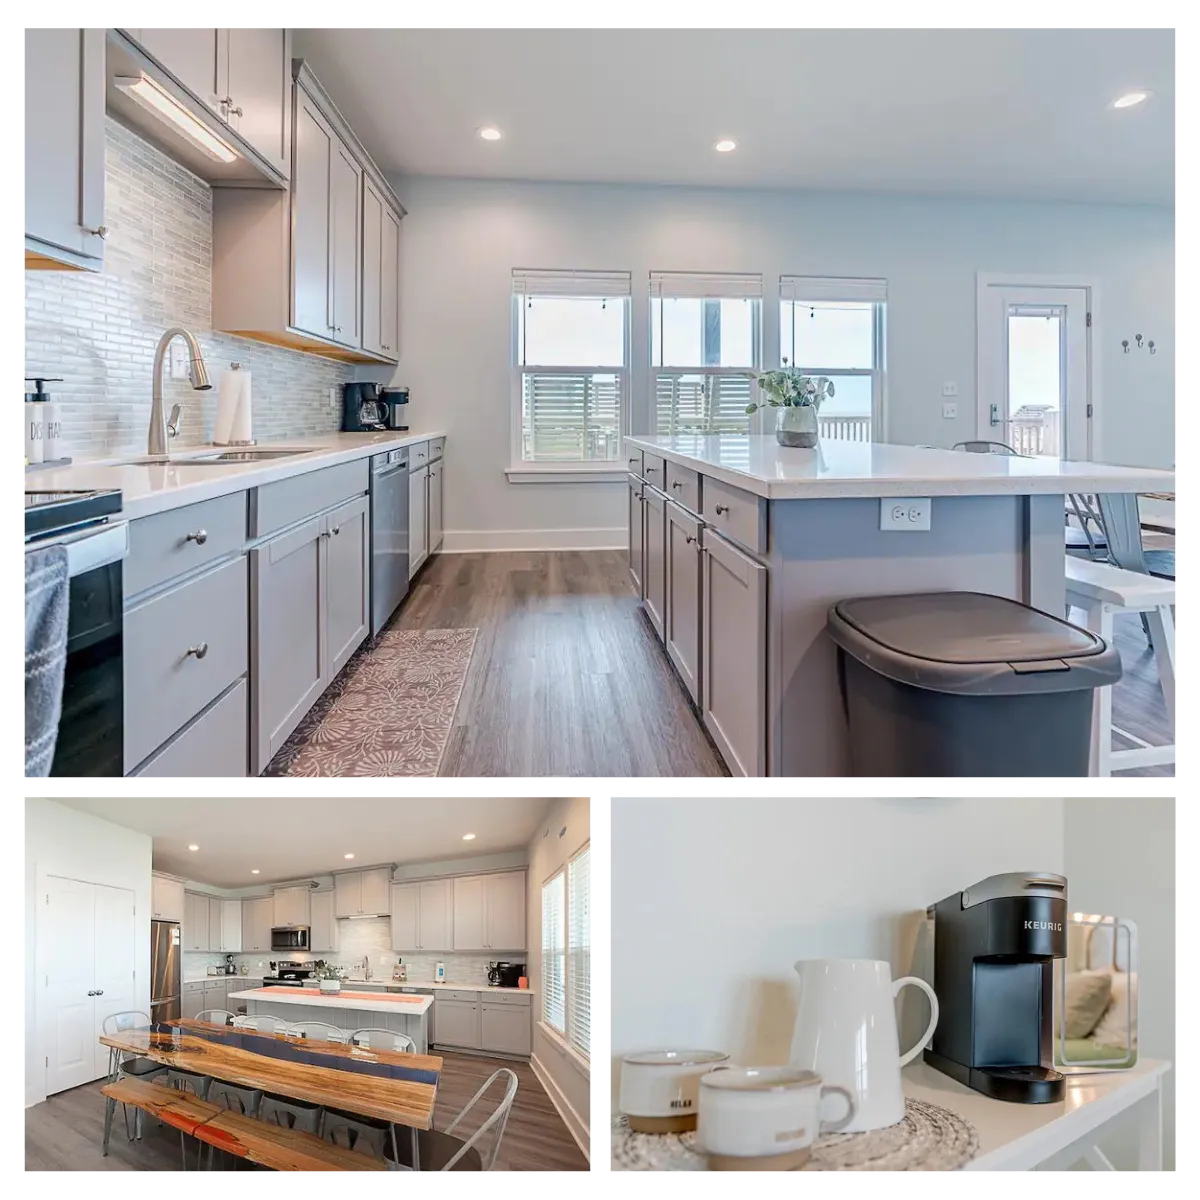 At Redfish Retreat, you'll find a kitchen packed with modern appliances like a double waffle maker and blender. The spacious dining area has plenty of seating, perfect for hosting family meals or entertaining guests with style.